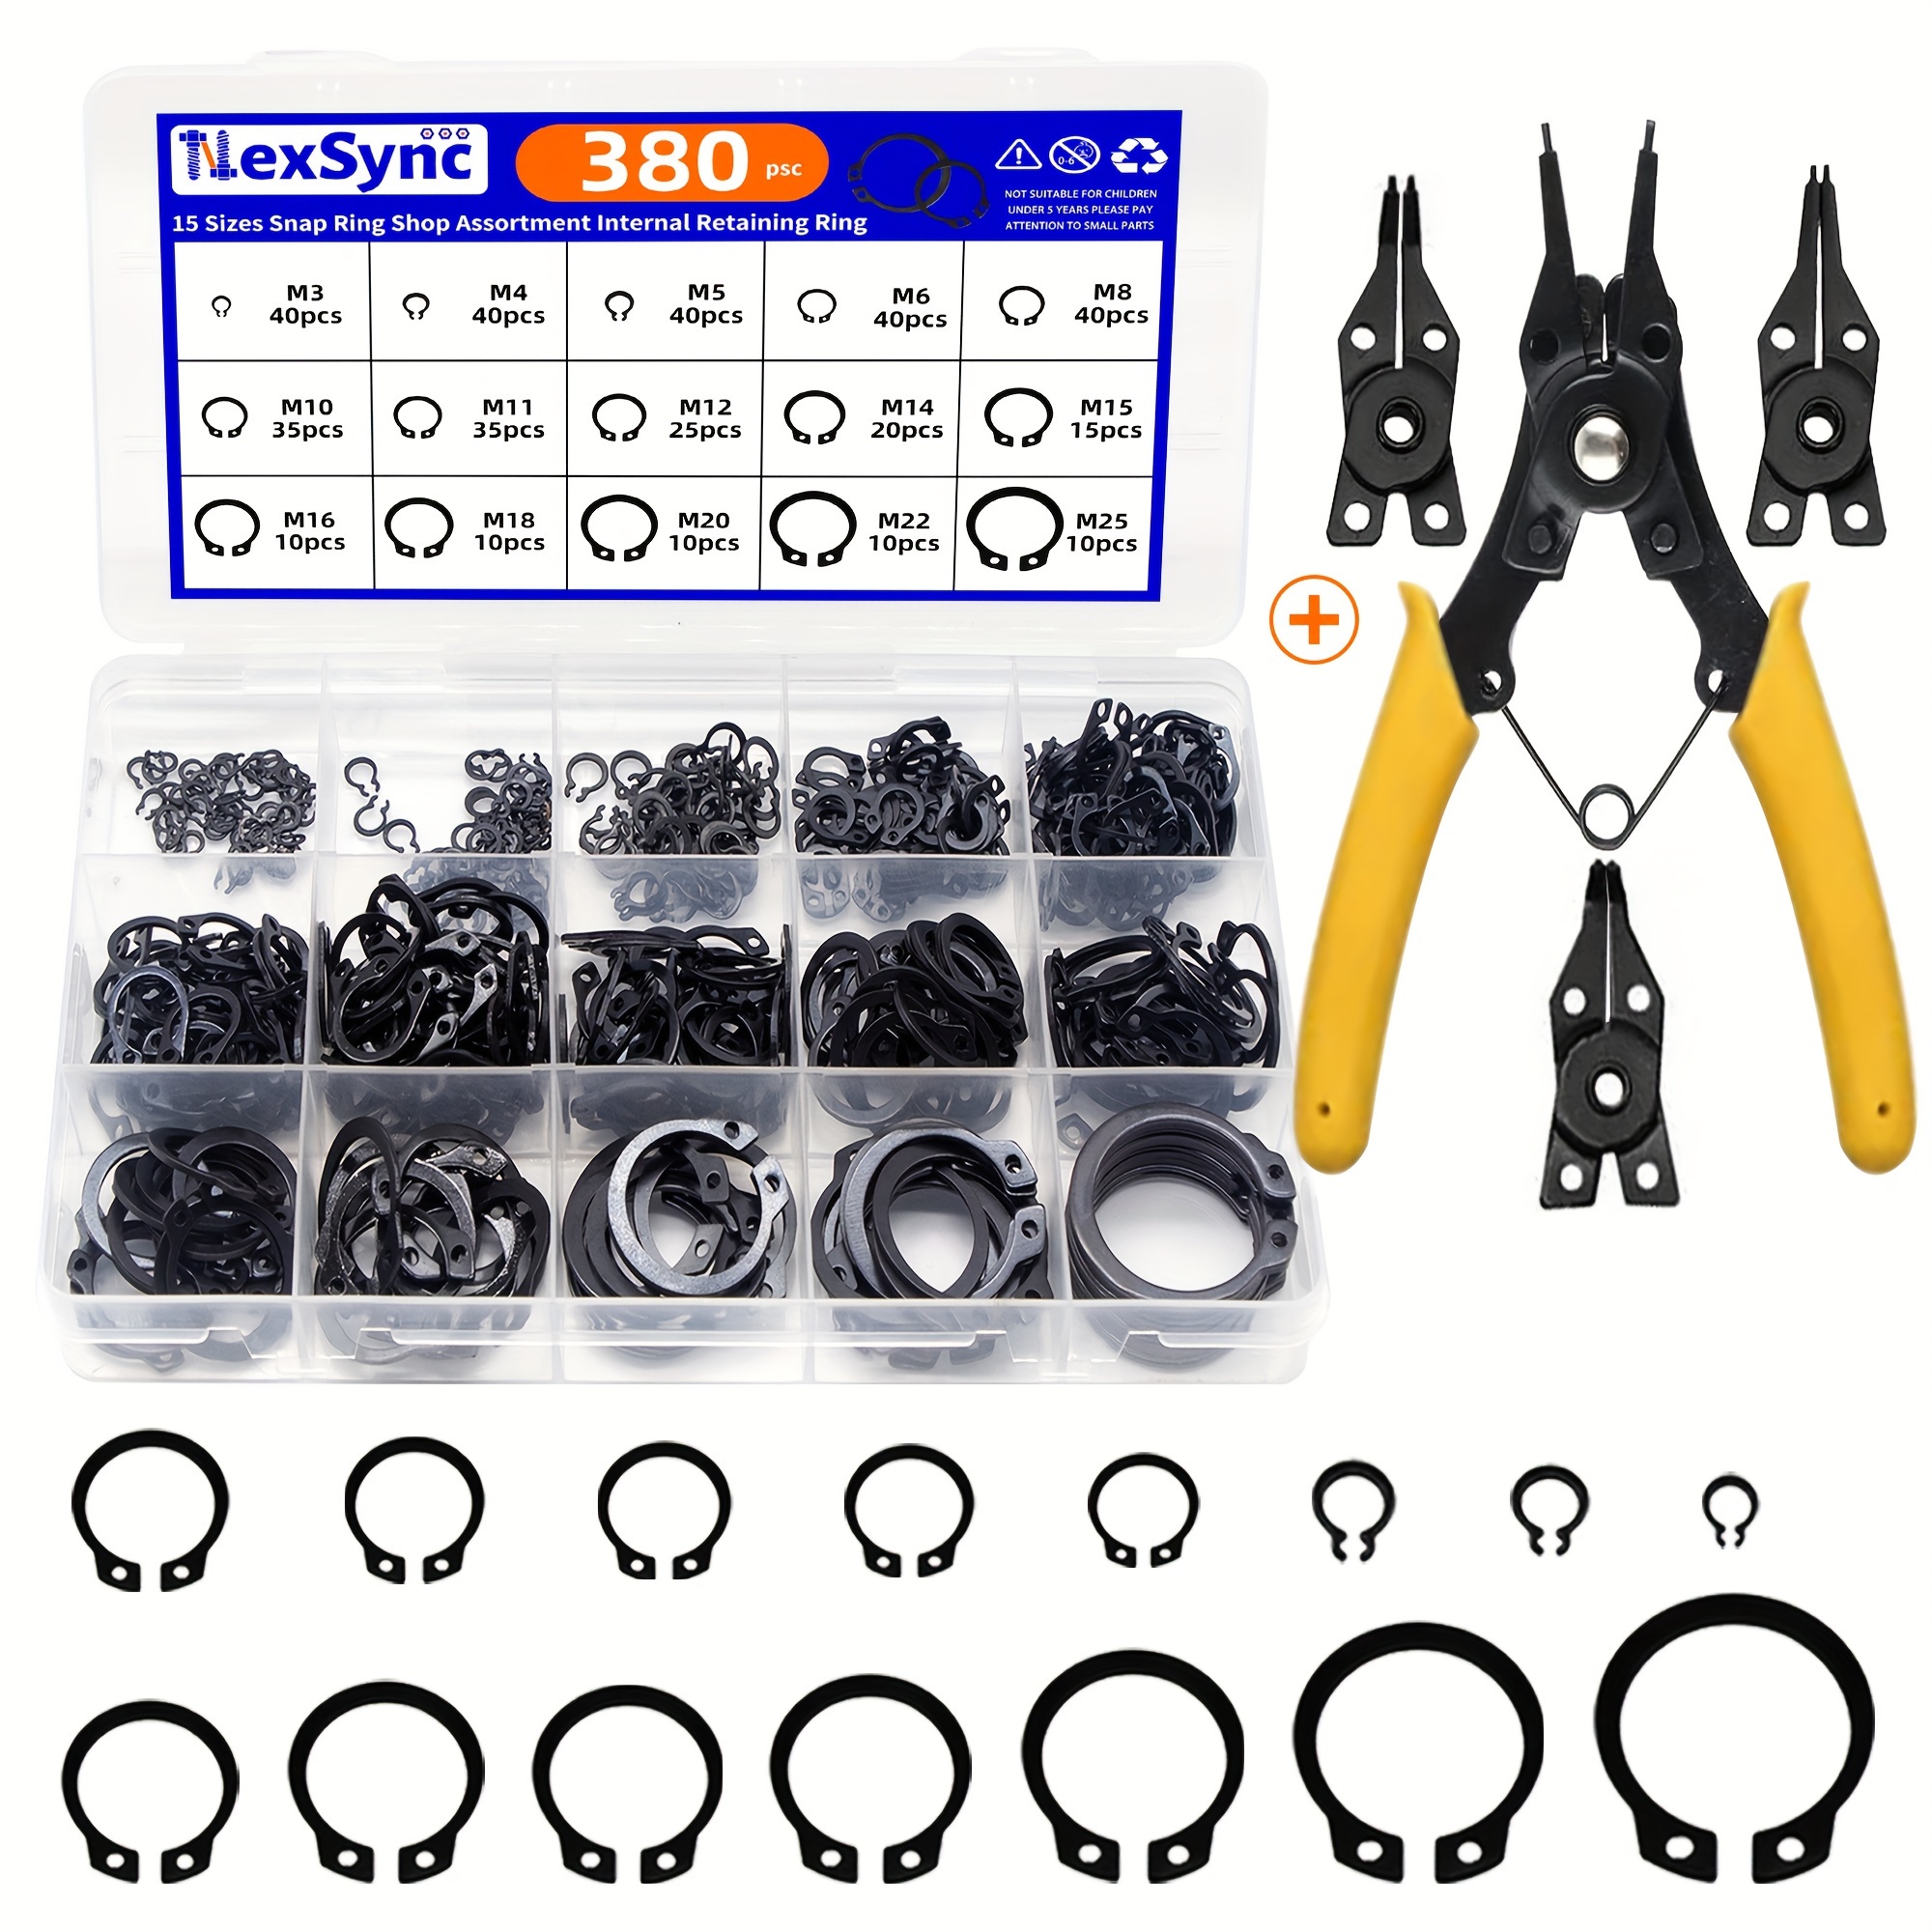 

381pcs 15 Sizes 3mm To 25mm Alloy Steel External Retaining Rings Internal Circlip Snap Retaining Clip Ring With 4 In 1 Snap Ring Pliers, Wrist Pin Clips Internal External Repair Projects